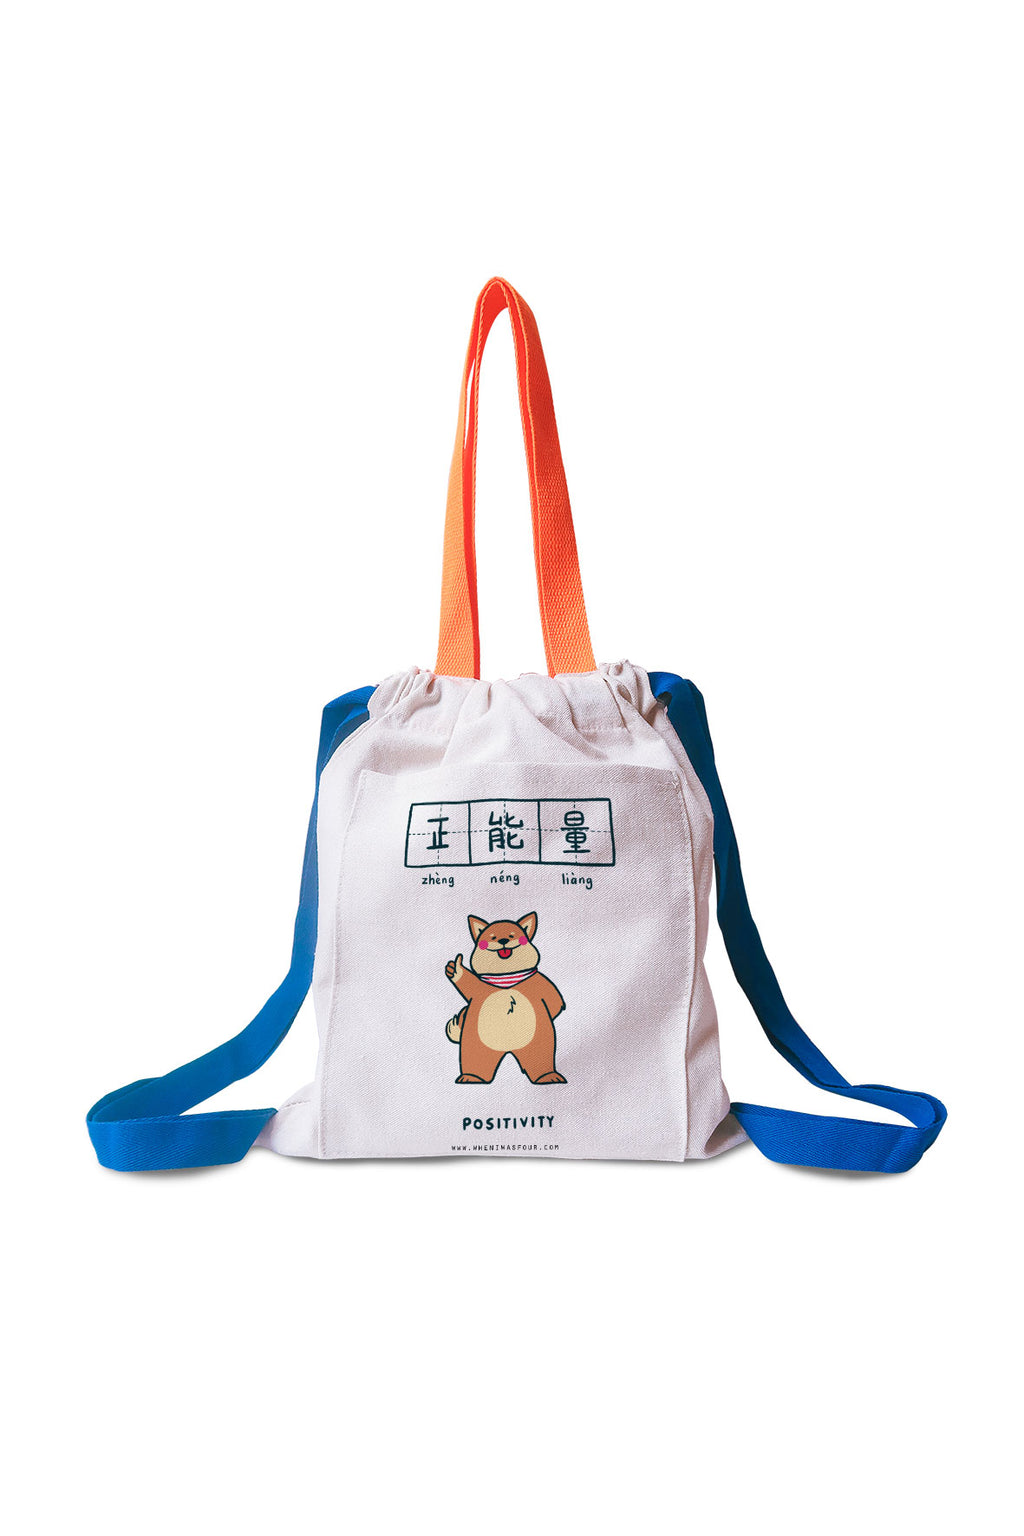 Positivity Kids Backpack - Backpack by wheniwasfour | 小时候, Singapore local artist online gift store